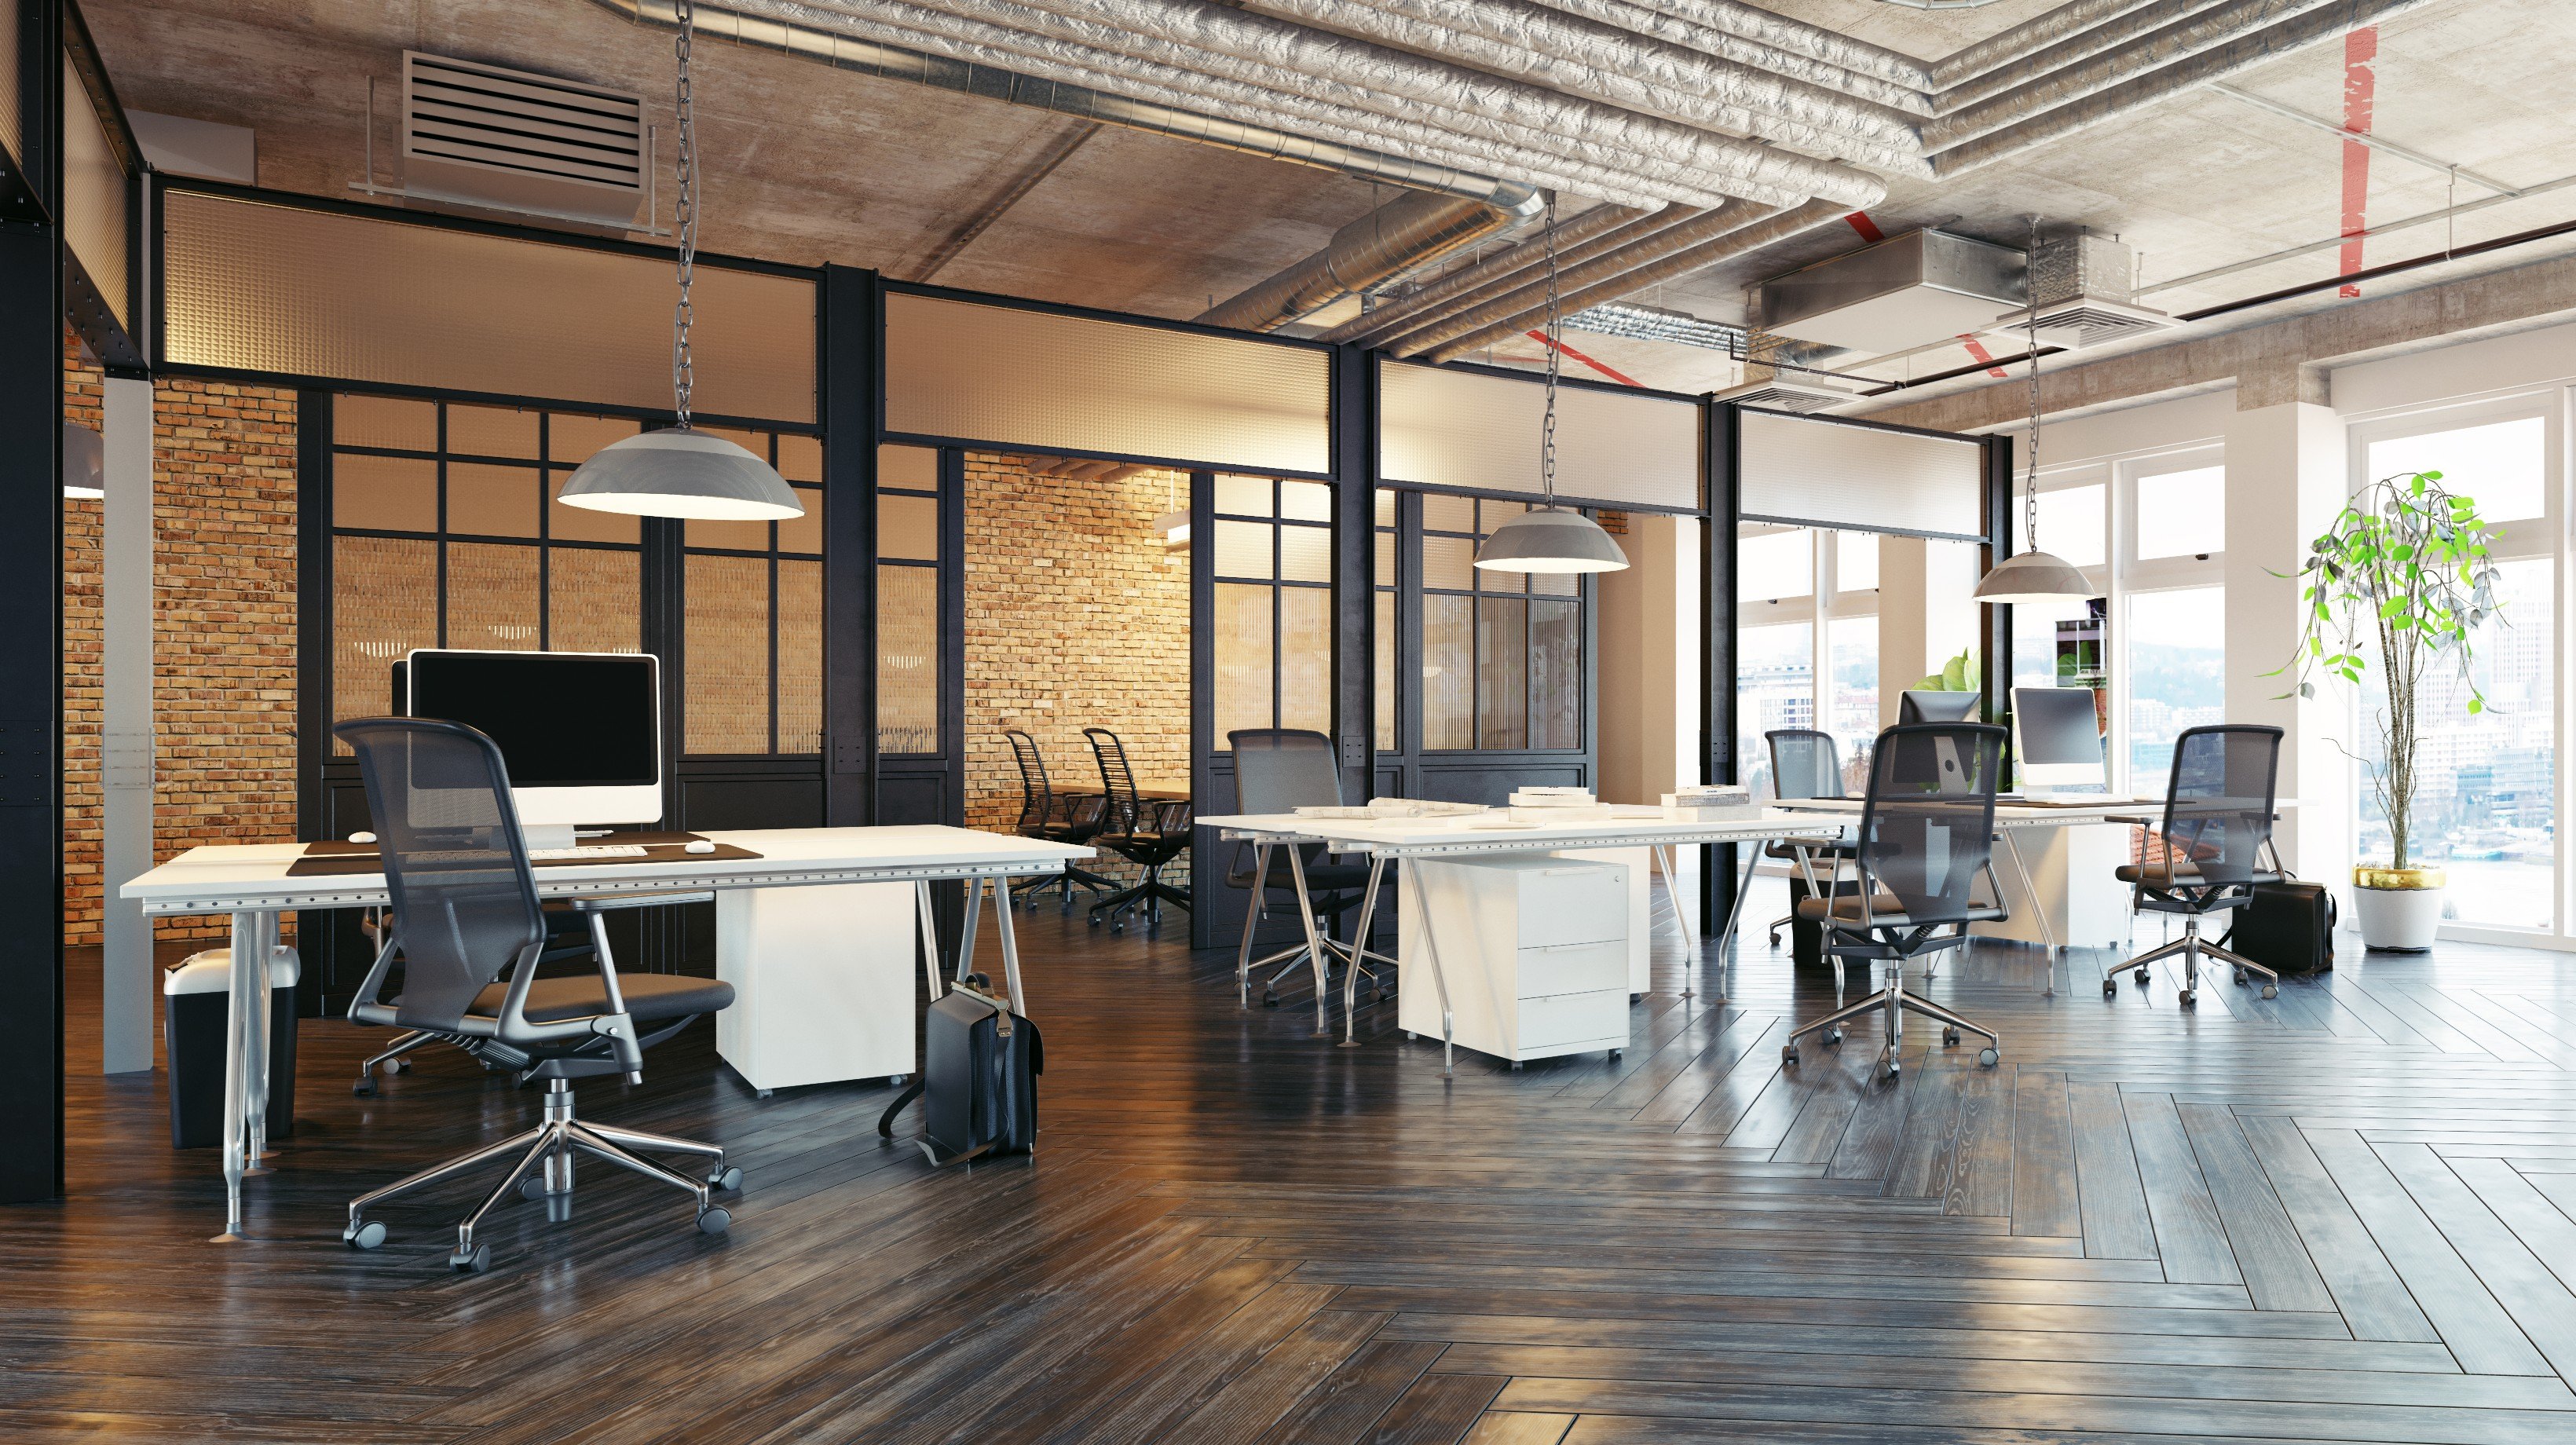 9 design tips to get the most out of your commercial interior